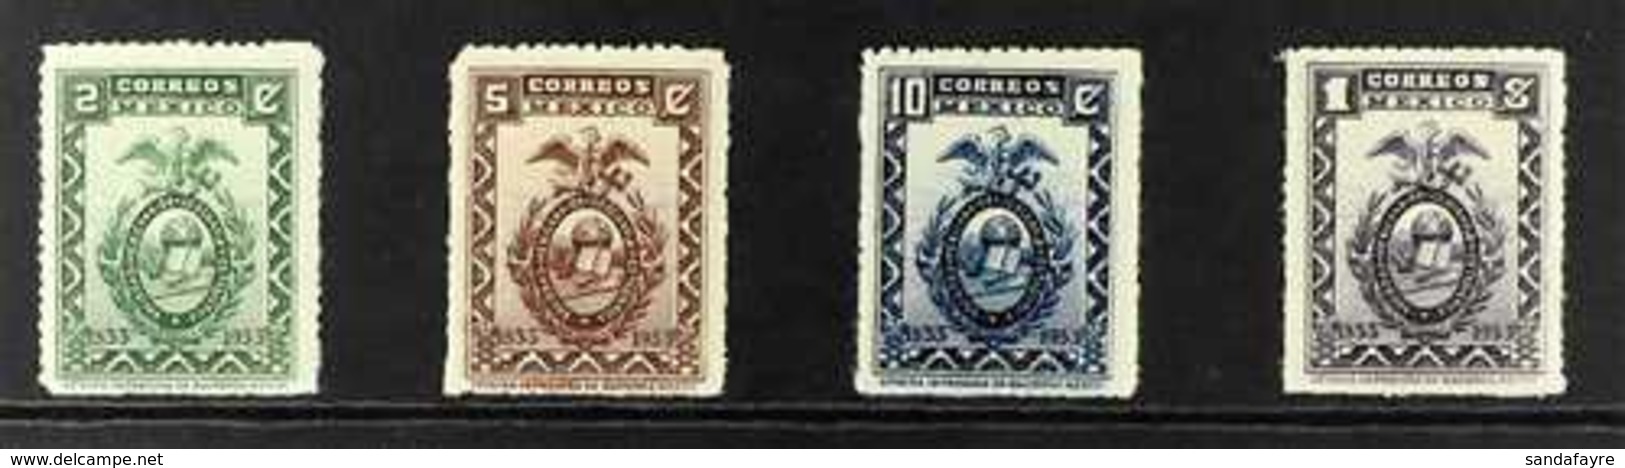 1933 Mexican Society Of Geography & Statistics Set, Scott 684/87, Never Hinged Mint (4 Stamps) For More Images, Please V - Mexico